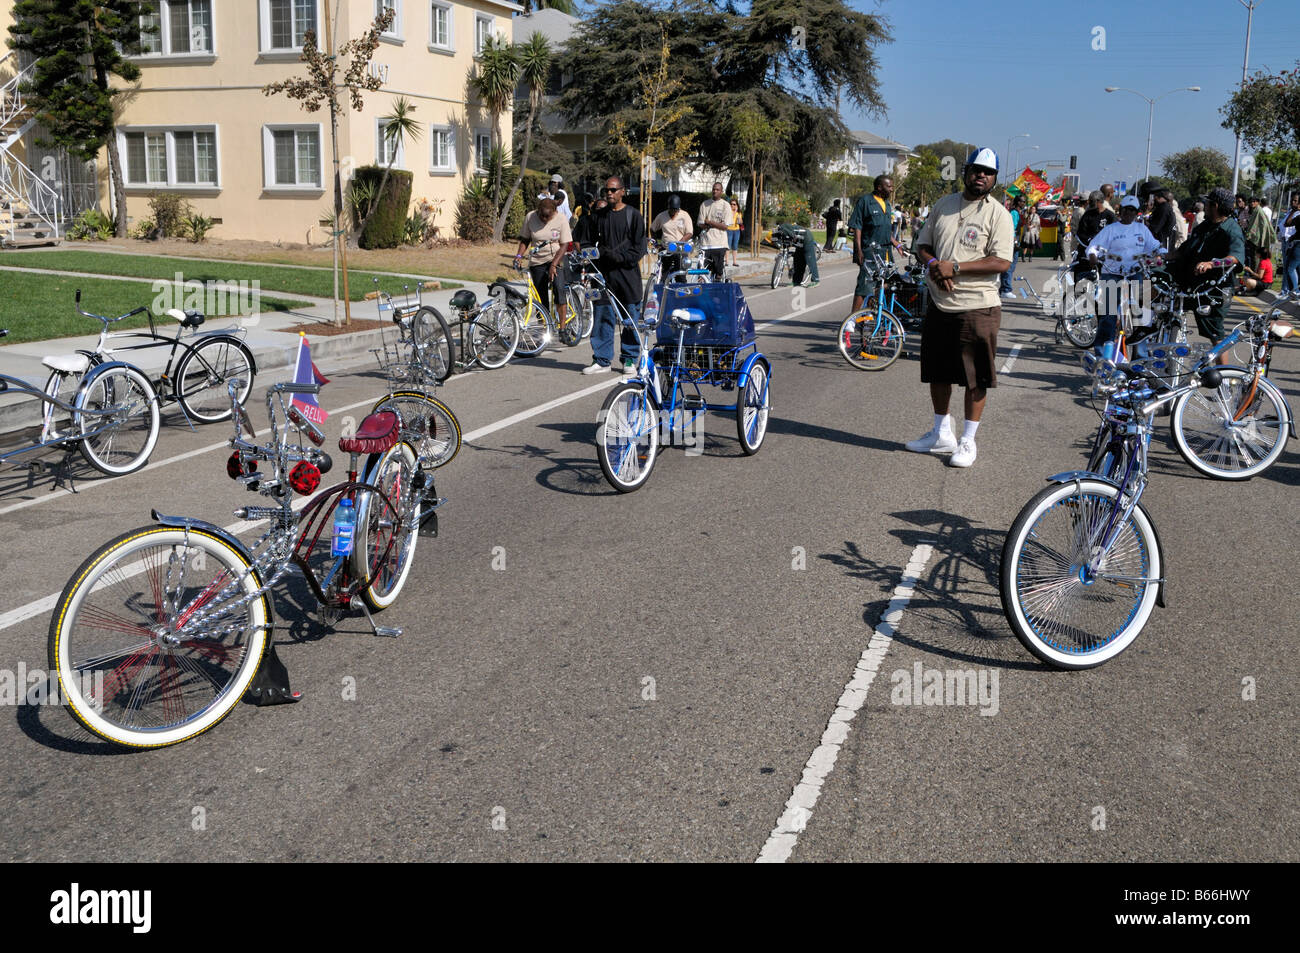 A group of young African American men sporting fantastically imaginative bikes Stock Photo